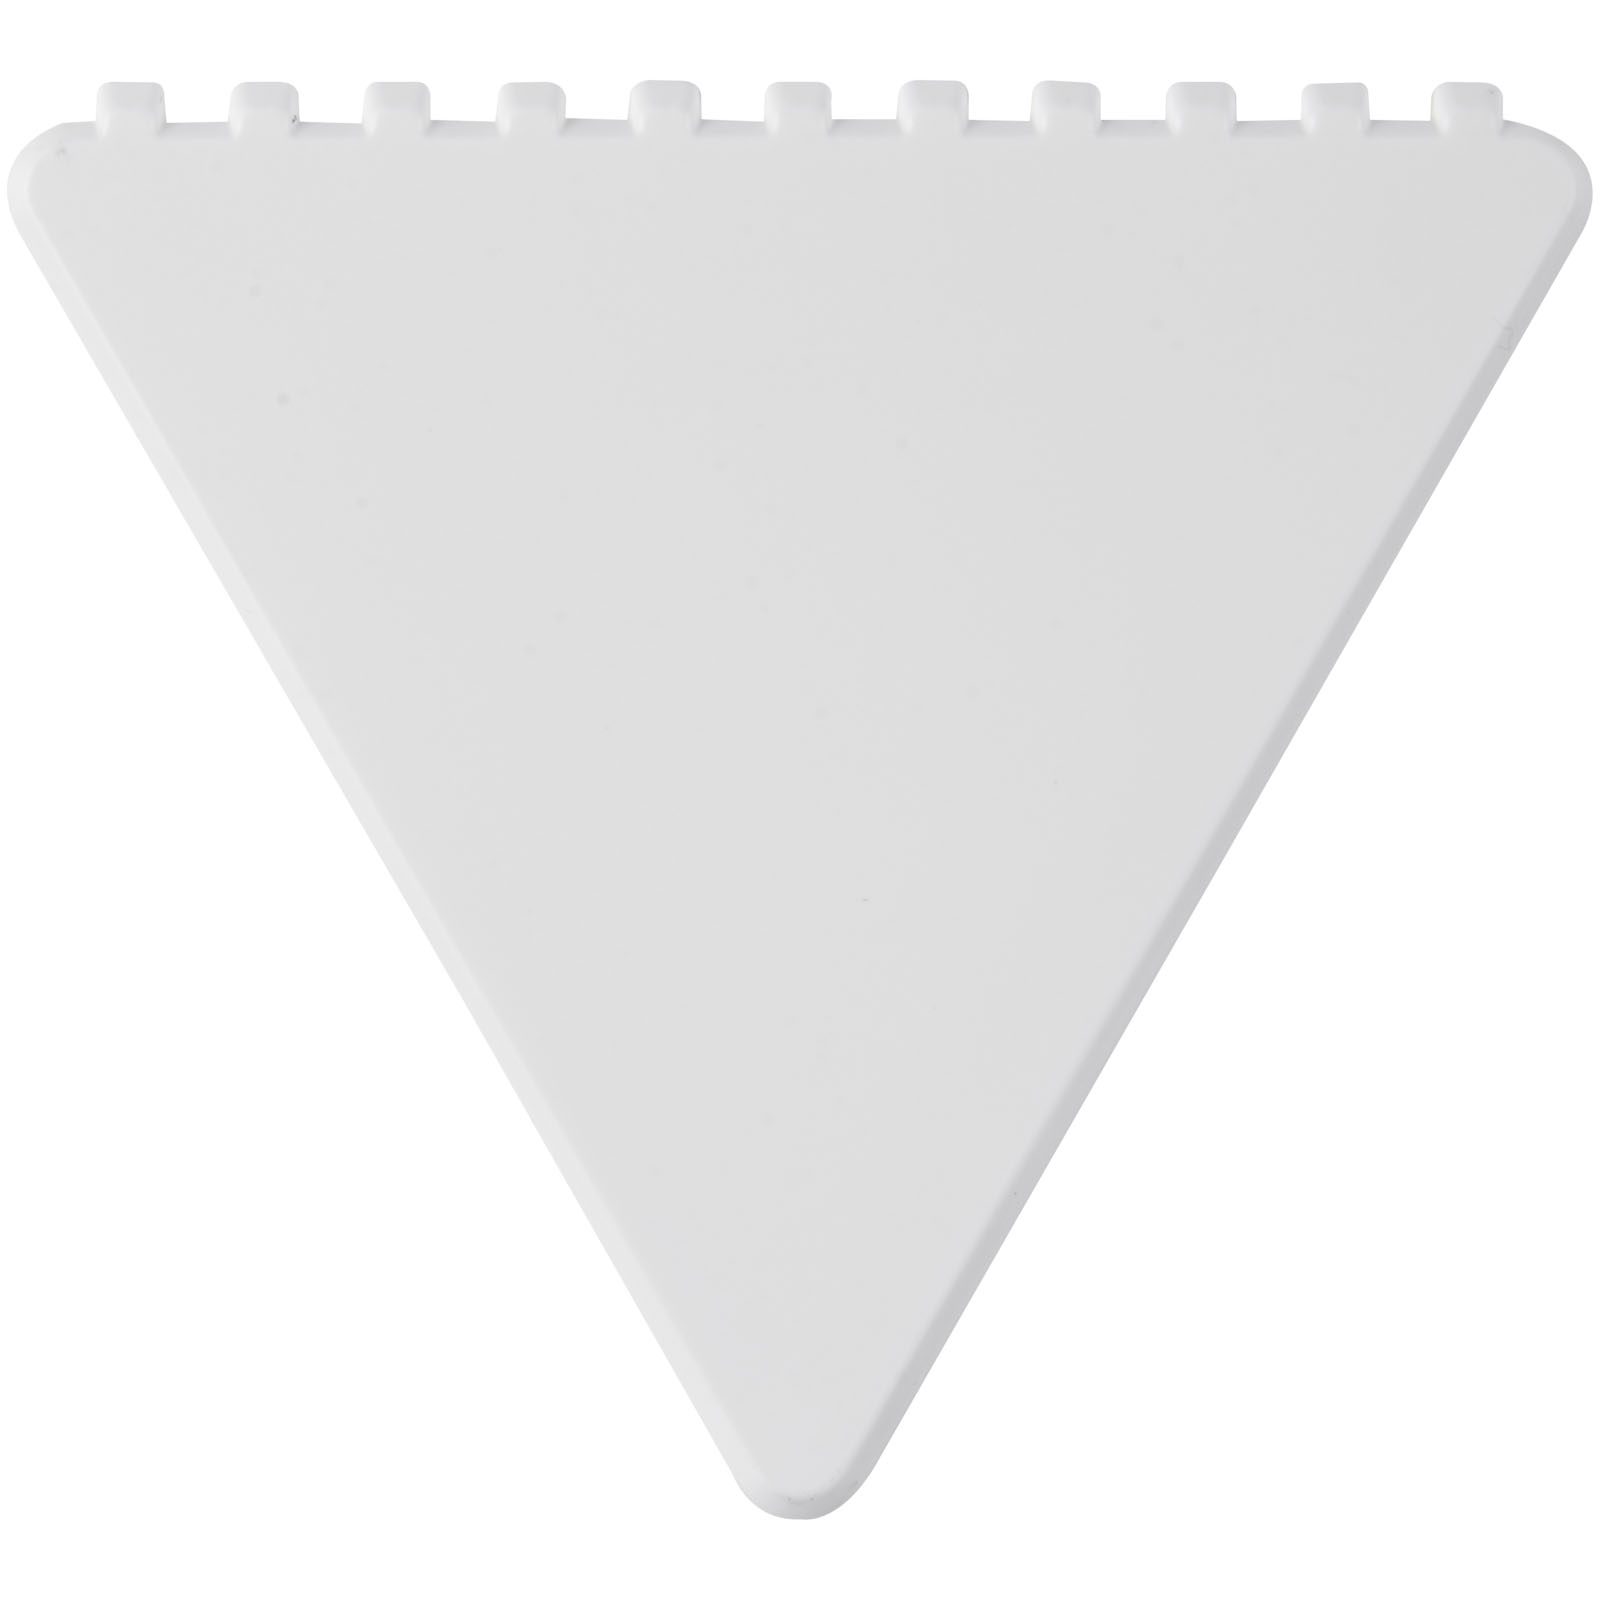 Advertising Car Accessories - Frosty triangular recycled plastic ice scraper - 1